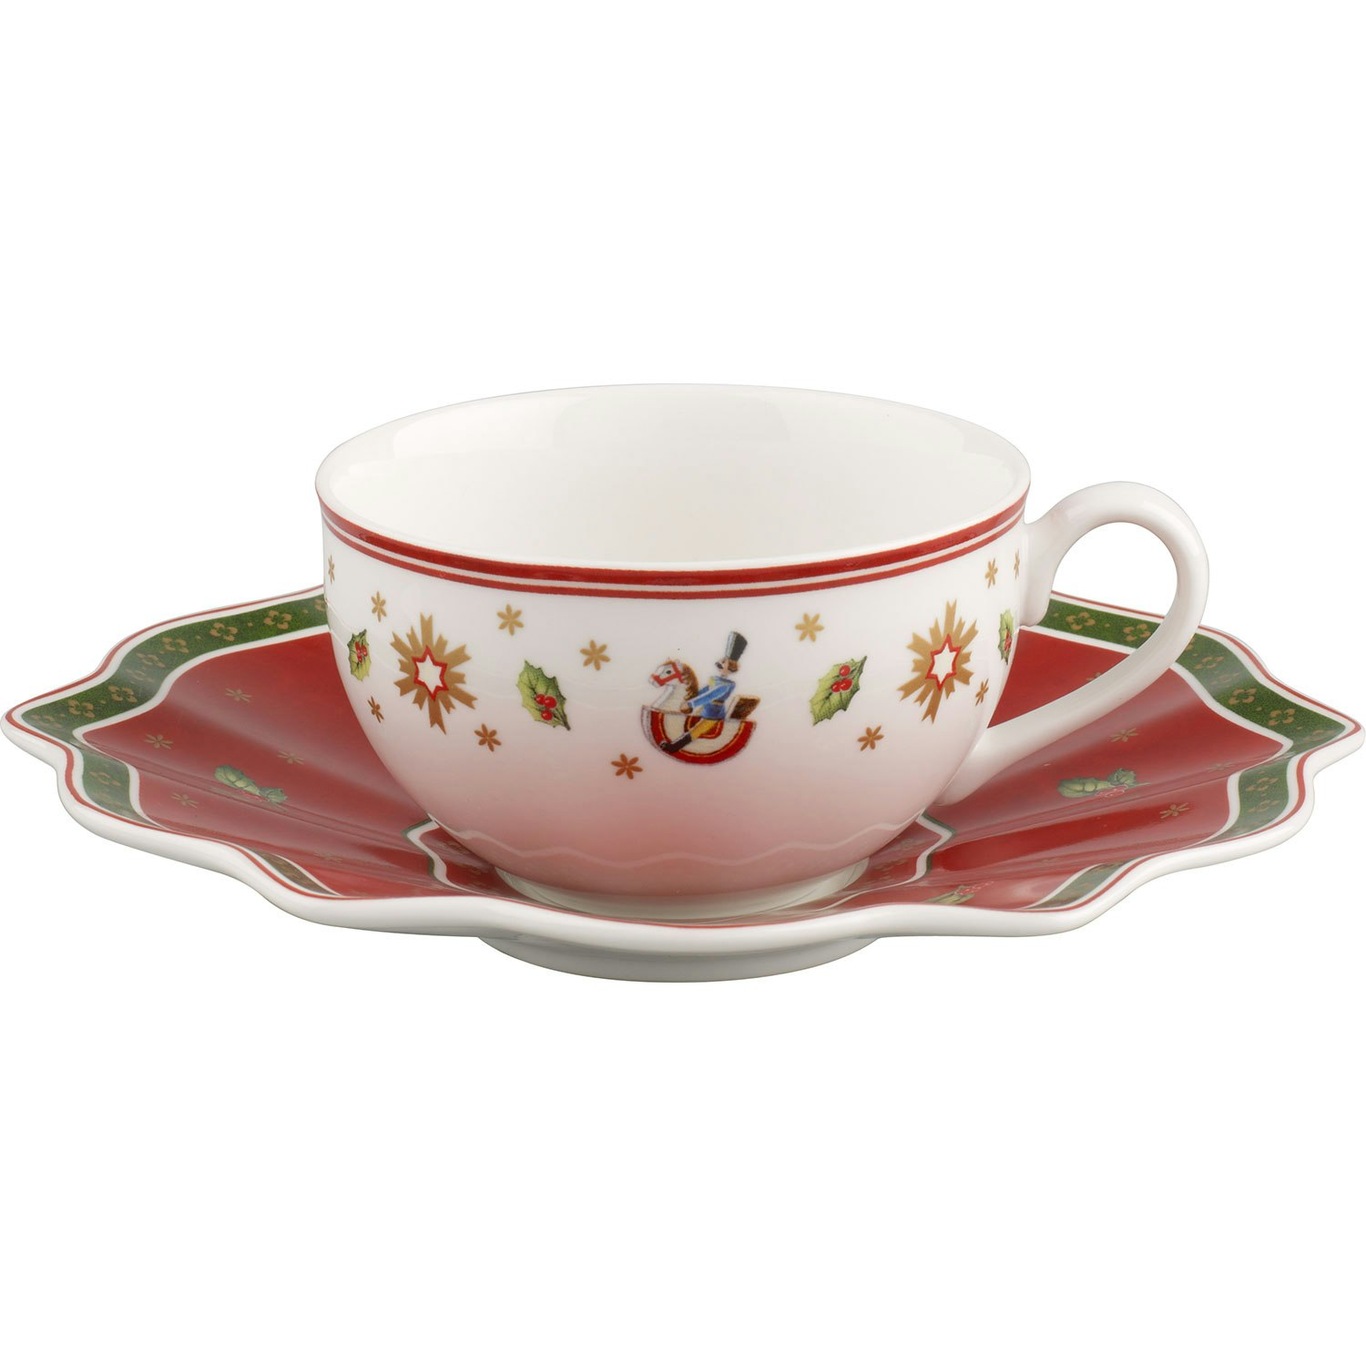 Toy's Delight Coffee Cup / Teacup With Platter 20 cl